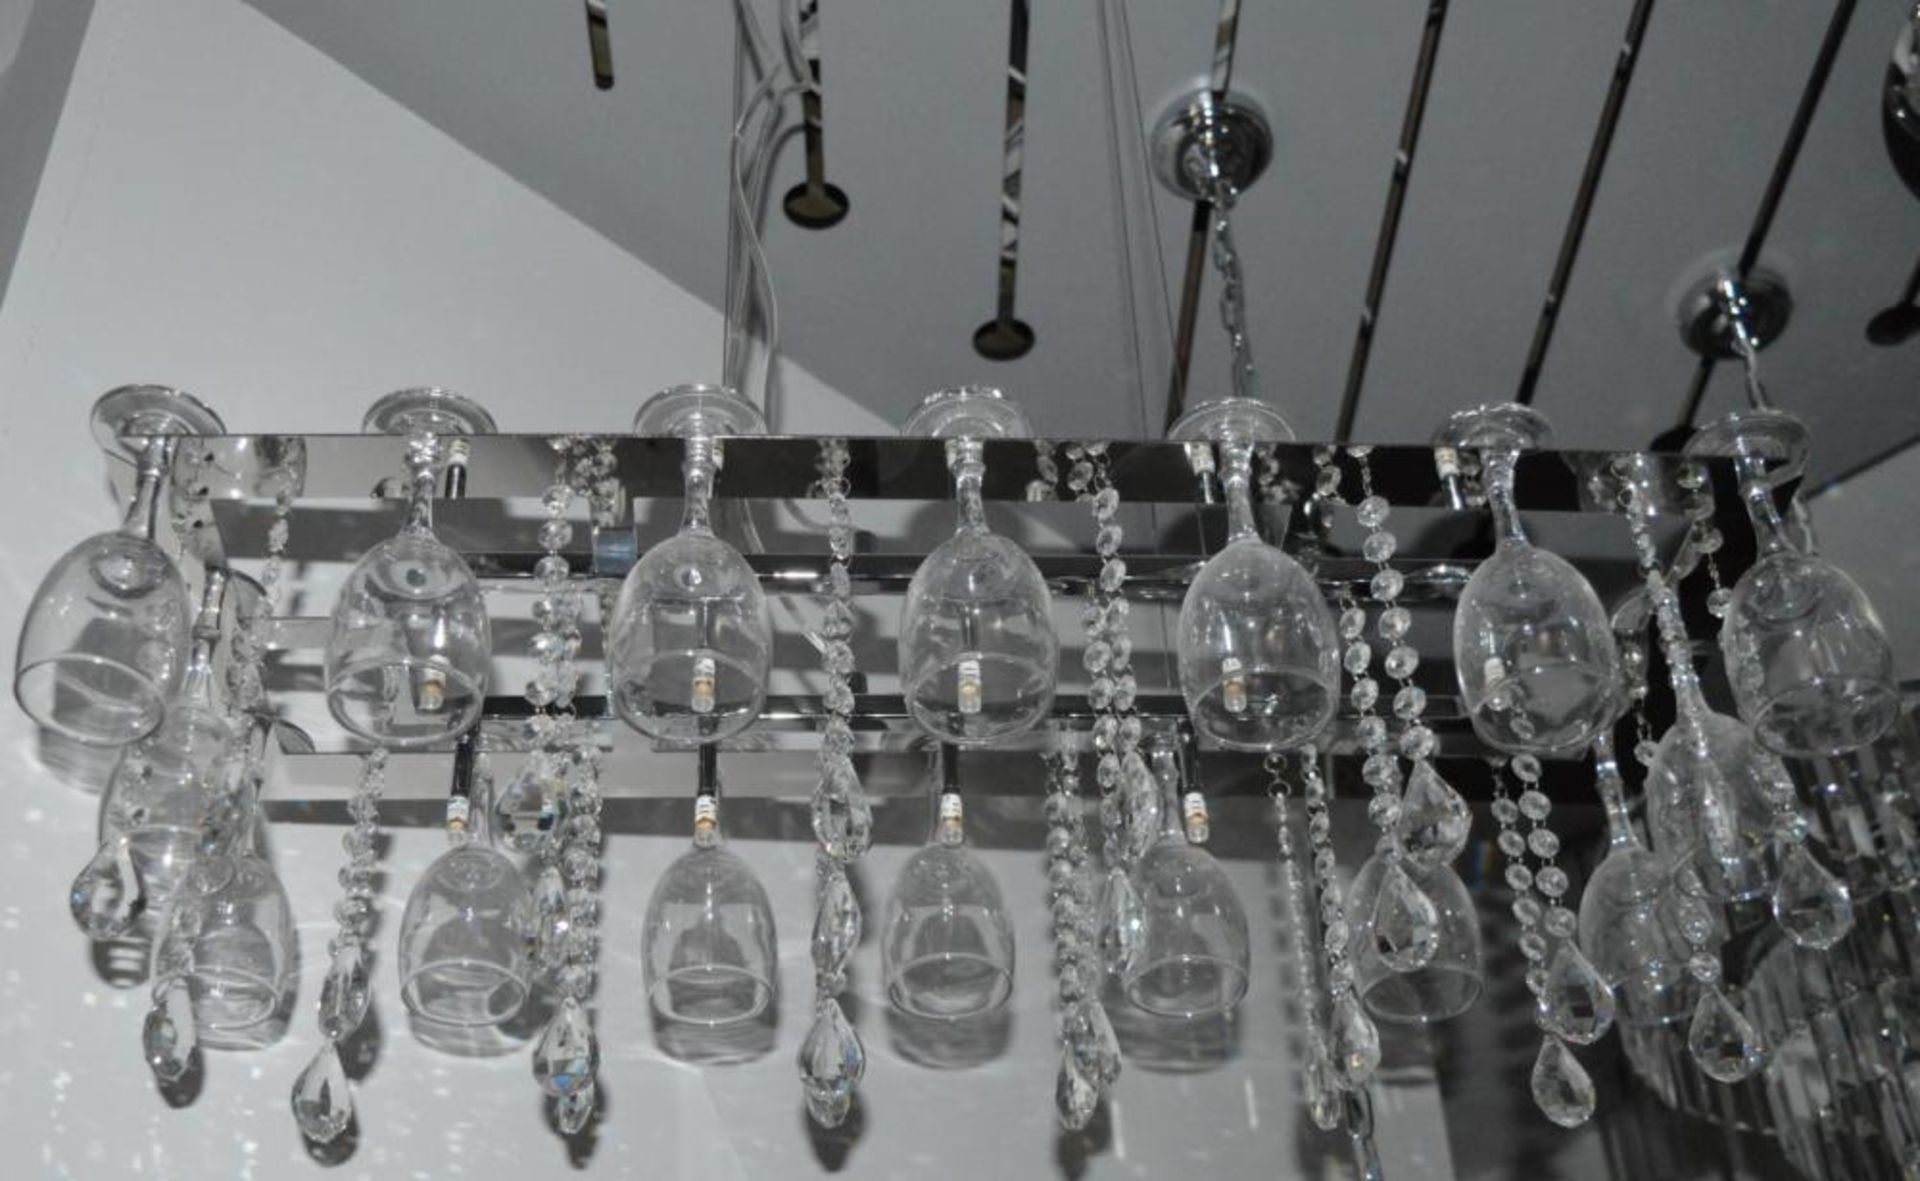 1 x Vino Chrome 10 Light Suspended Light Fitting With Crystal Button Drops and Sixteen Wine Glasses - Image 7 of 7